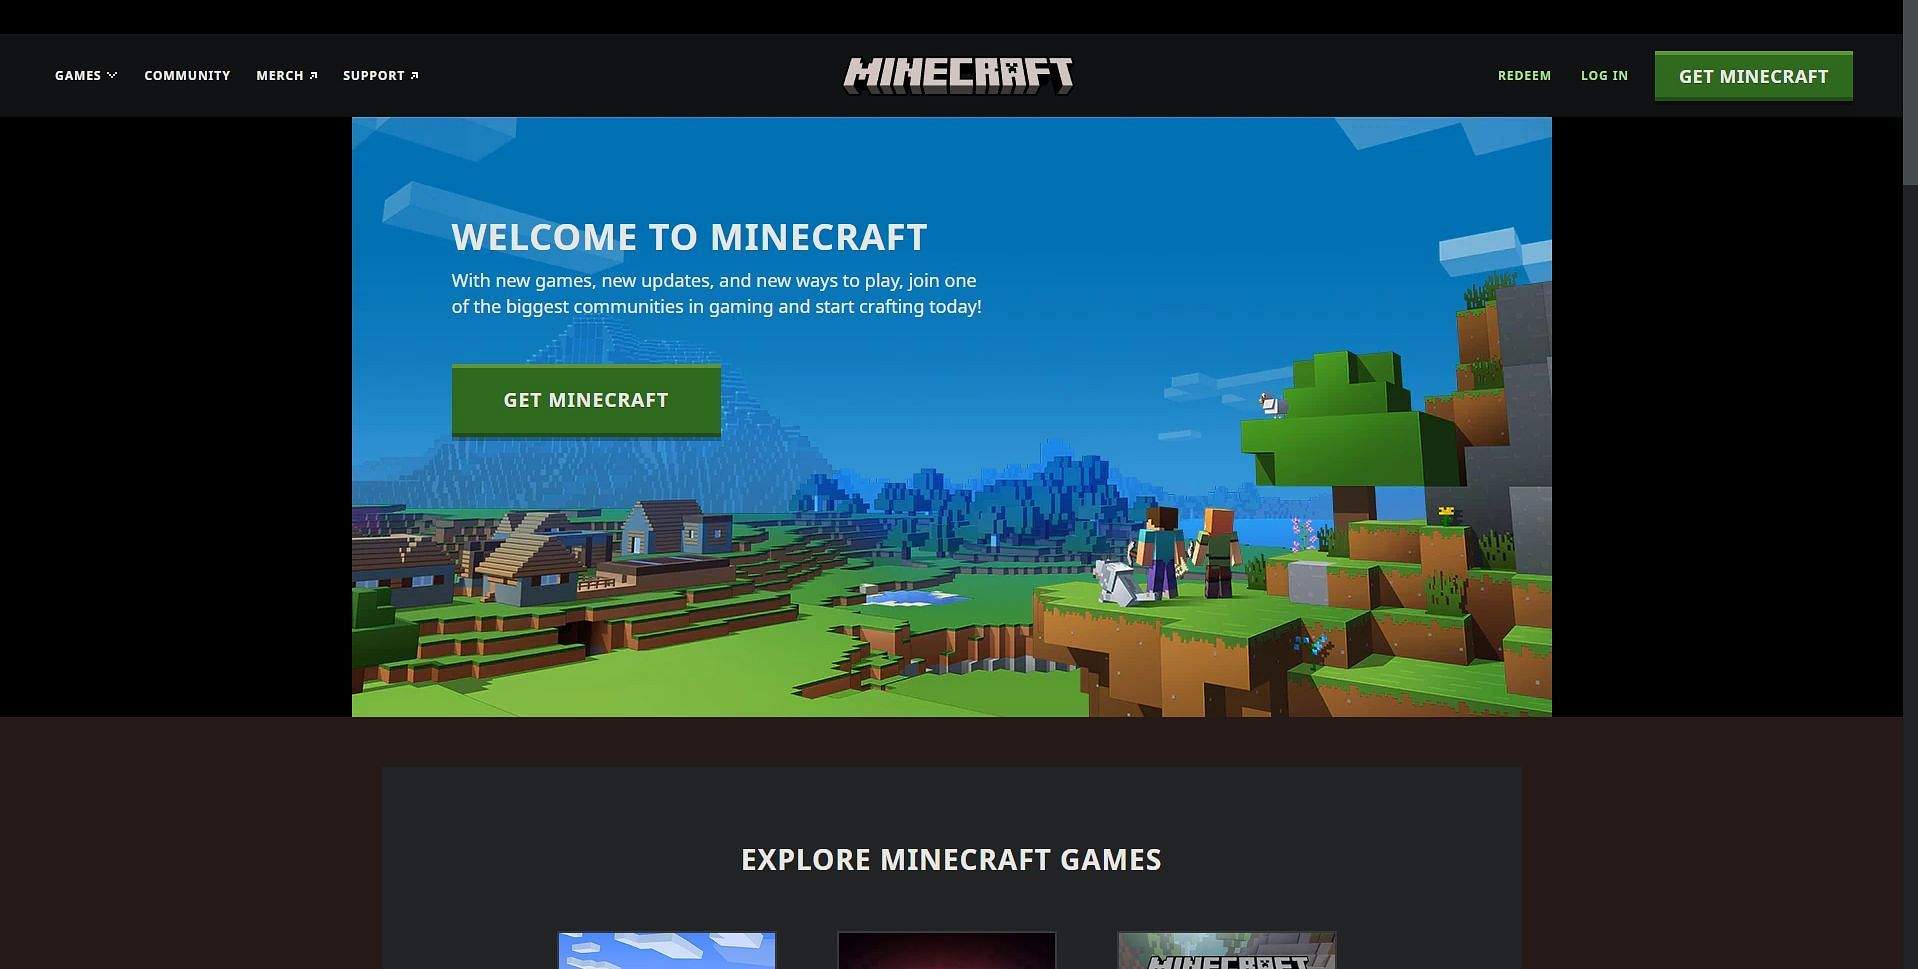 why is my minecraft launcher not responding when i open it?